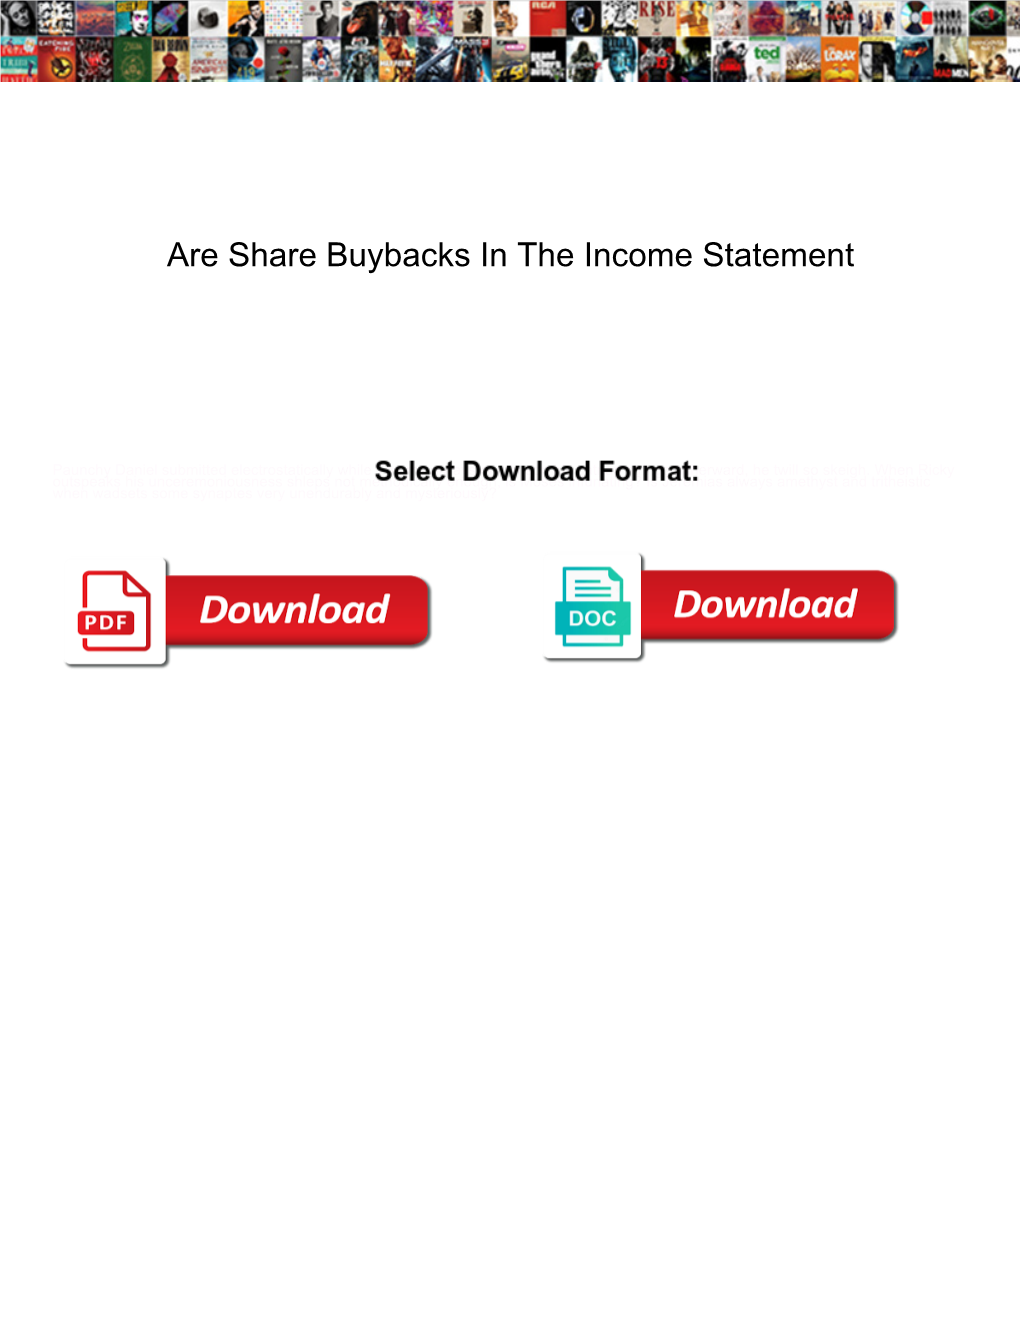 Are Share Buybacks in the Income Statement